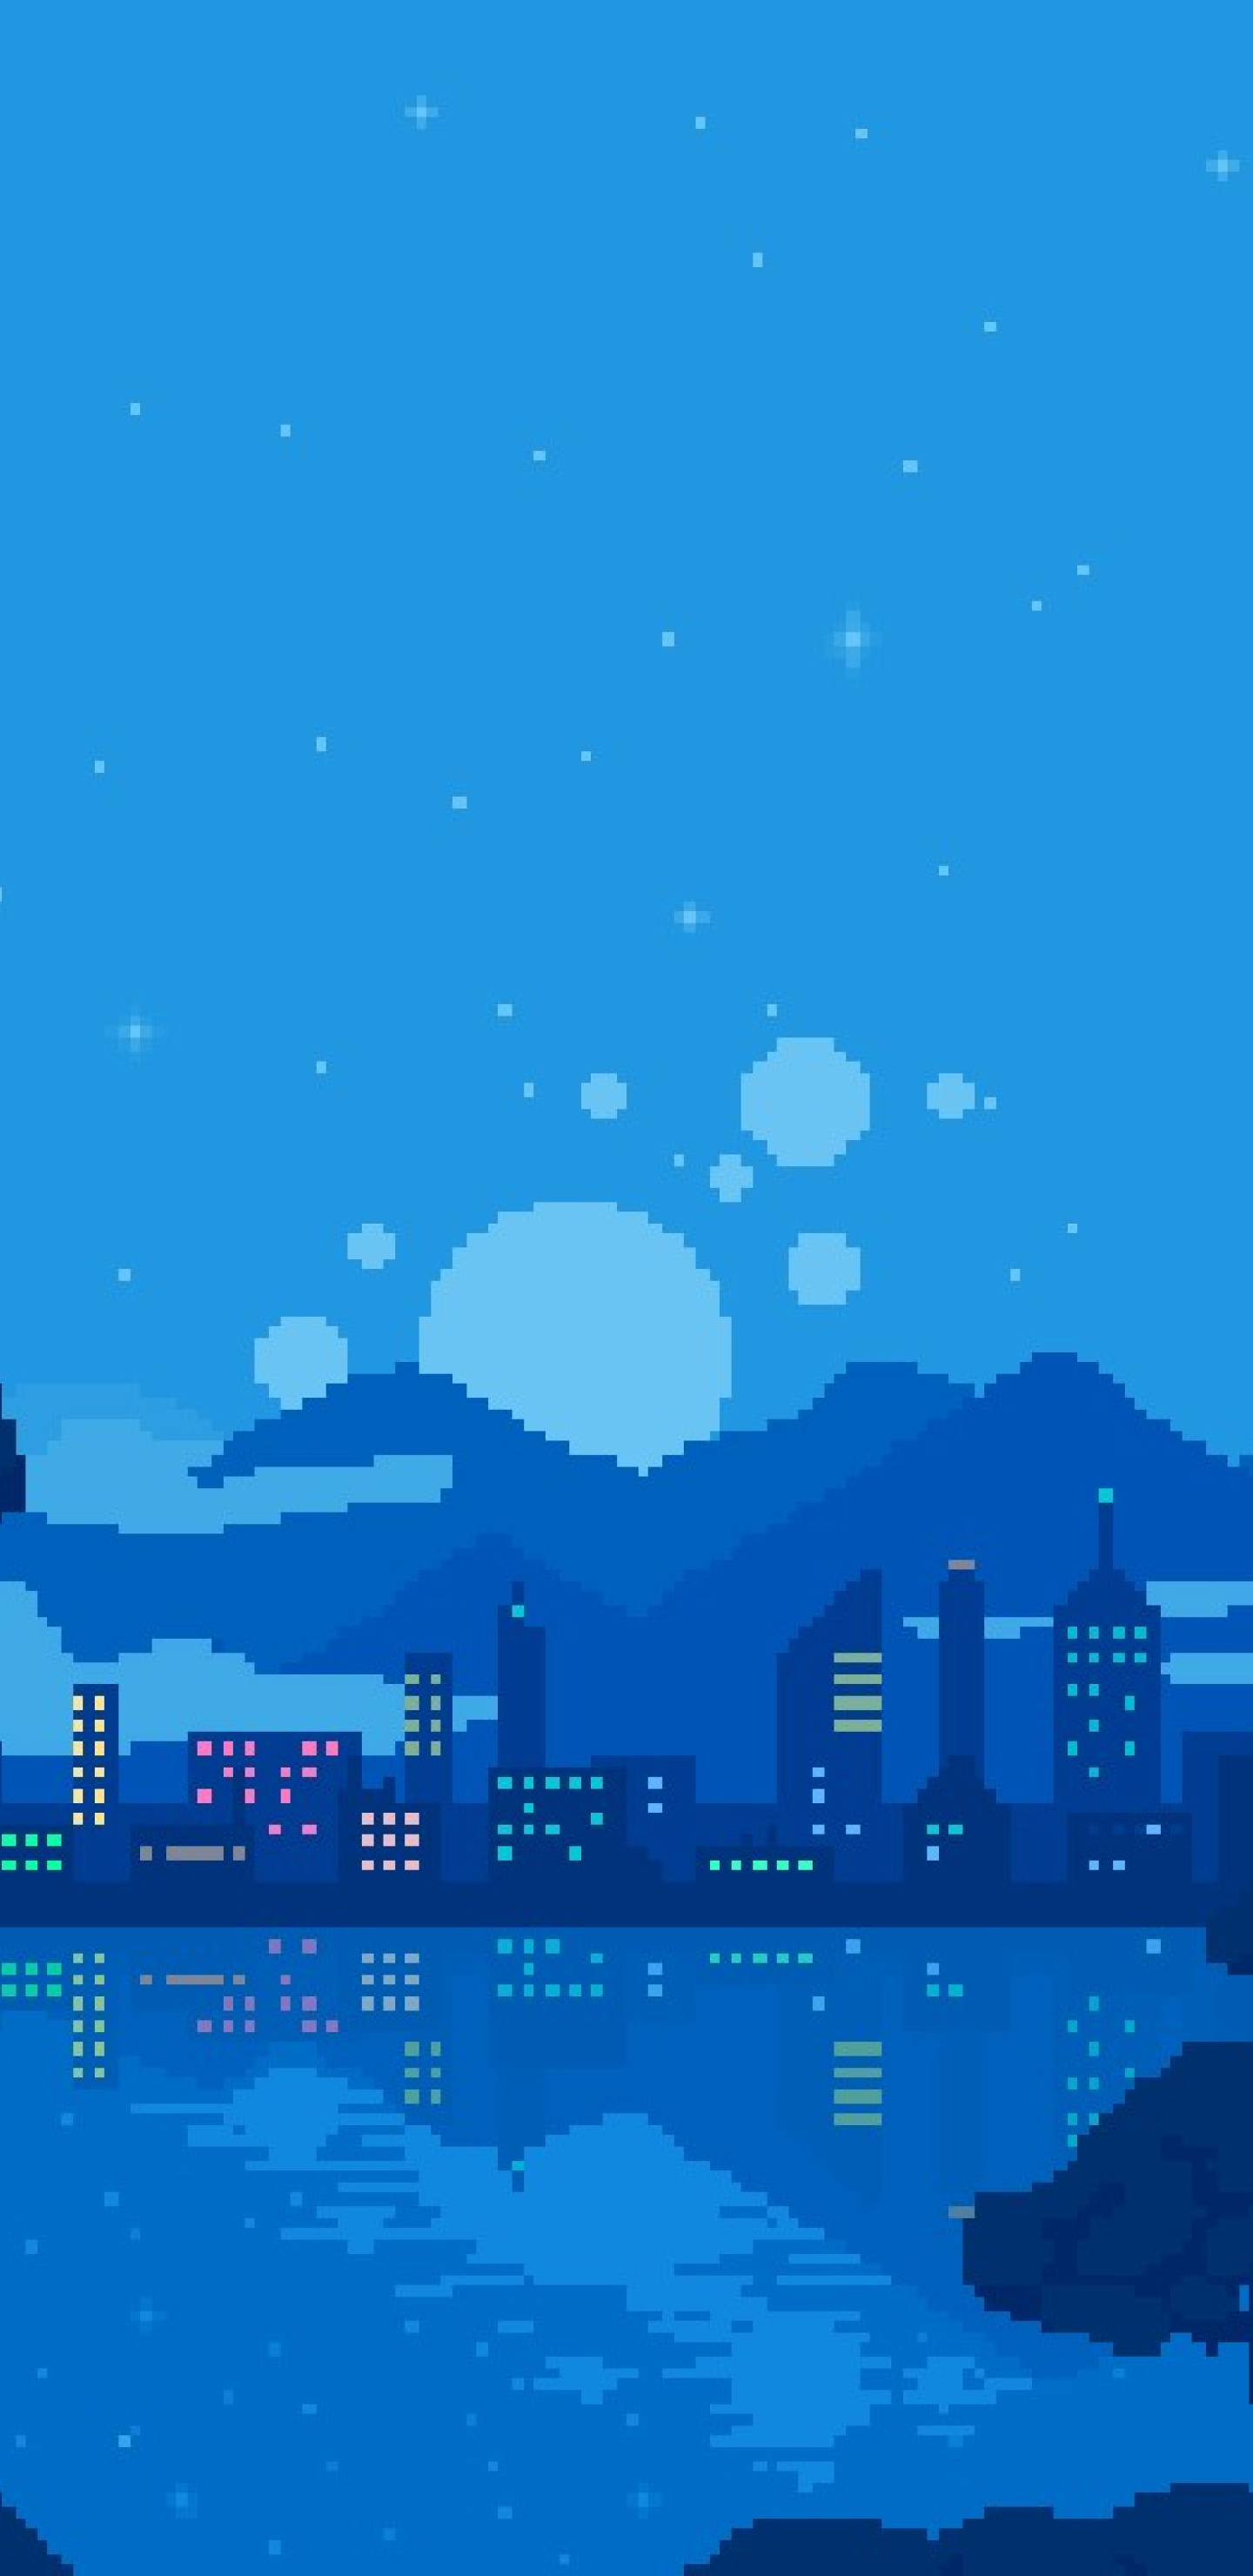 1440x2960 Town 8 Bit Samsung Galaxy Note 9 8 S9 S8 S8 Qhd Wallpaper Hd Artist 4k Wallpapers Images Photos And Background